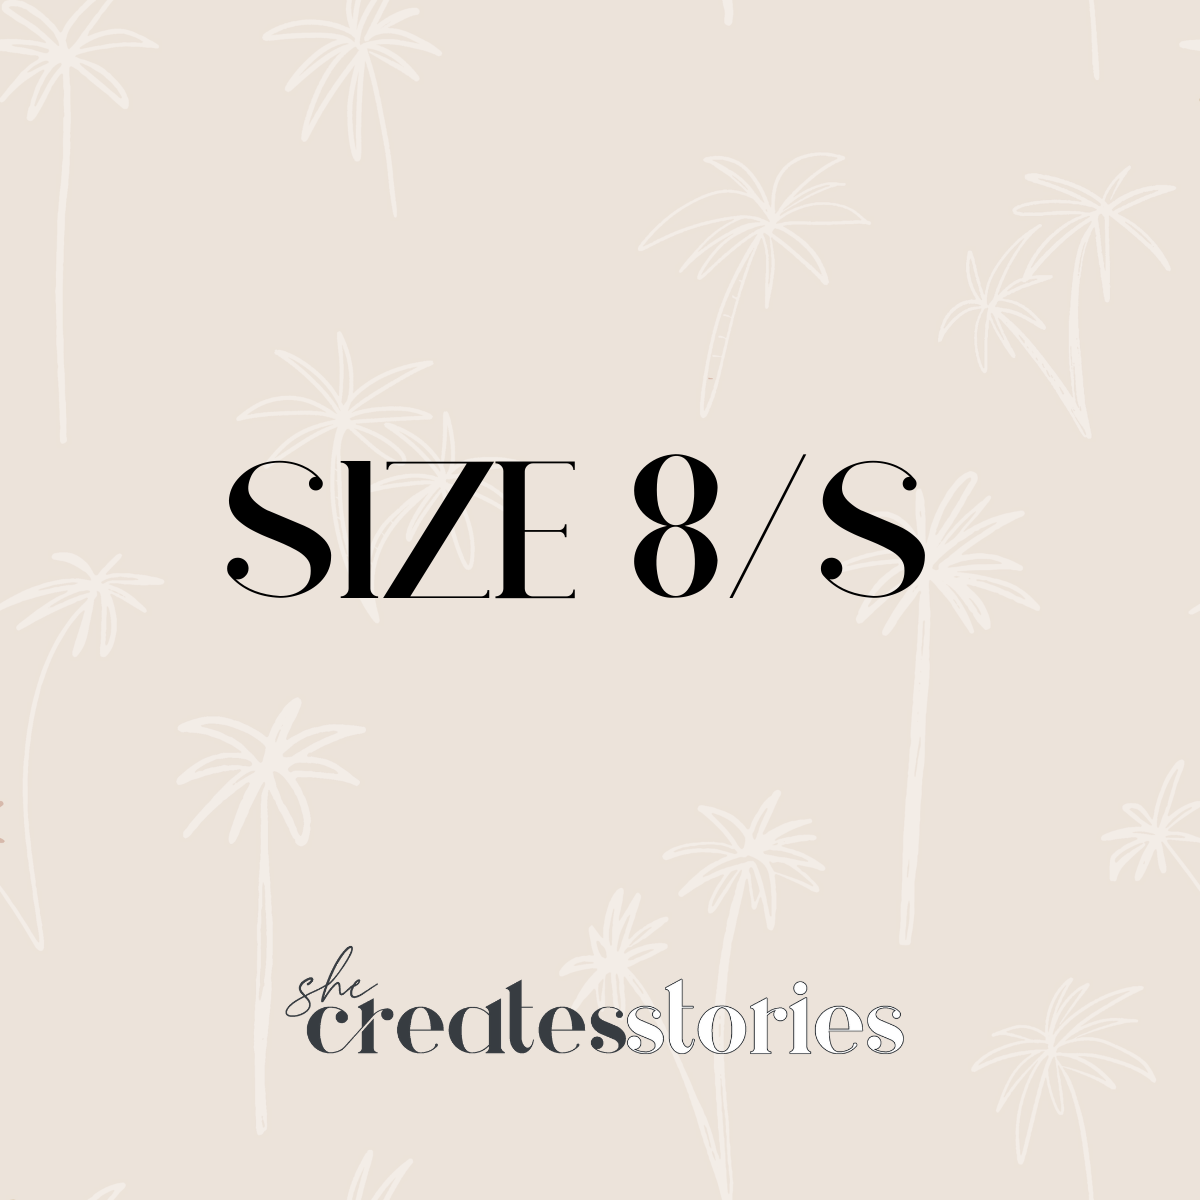 Image of our size 8/S styles logo